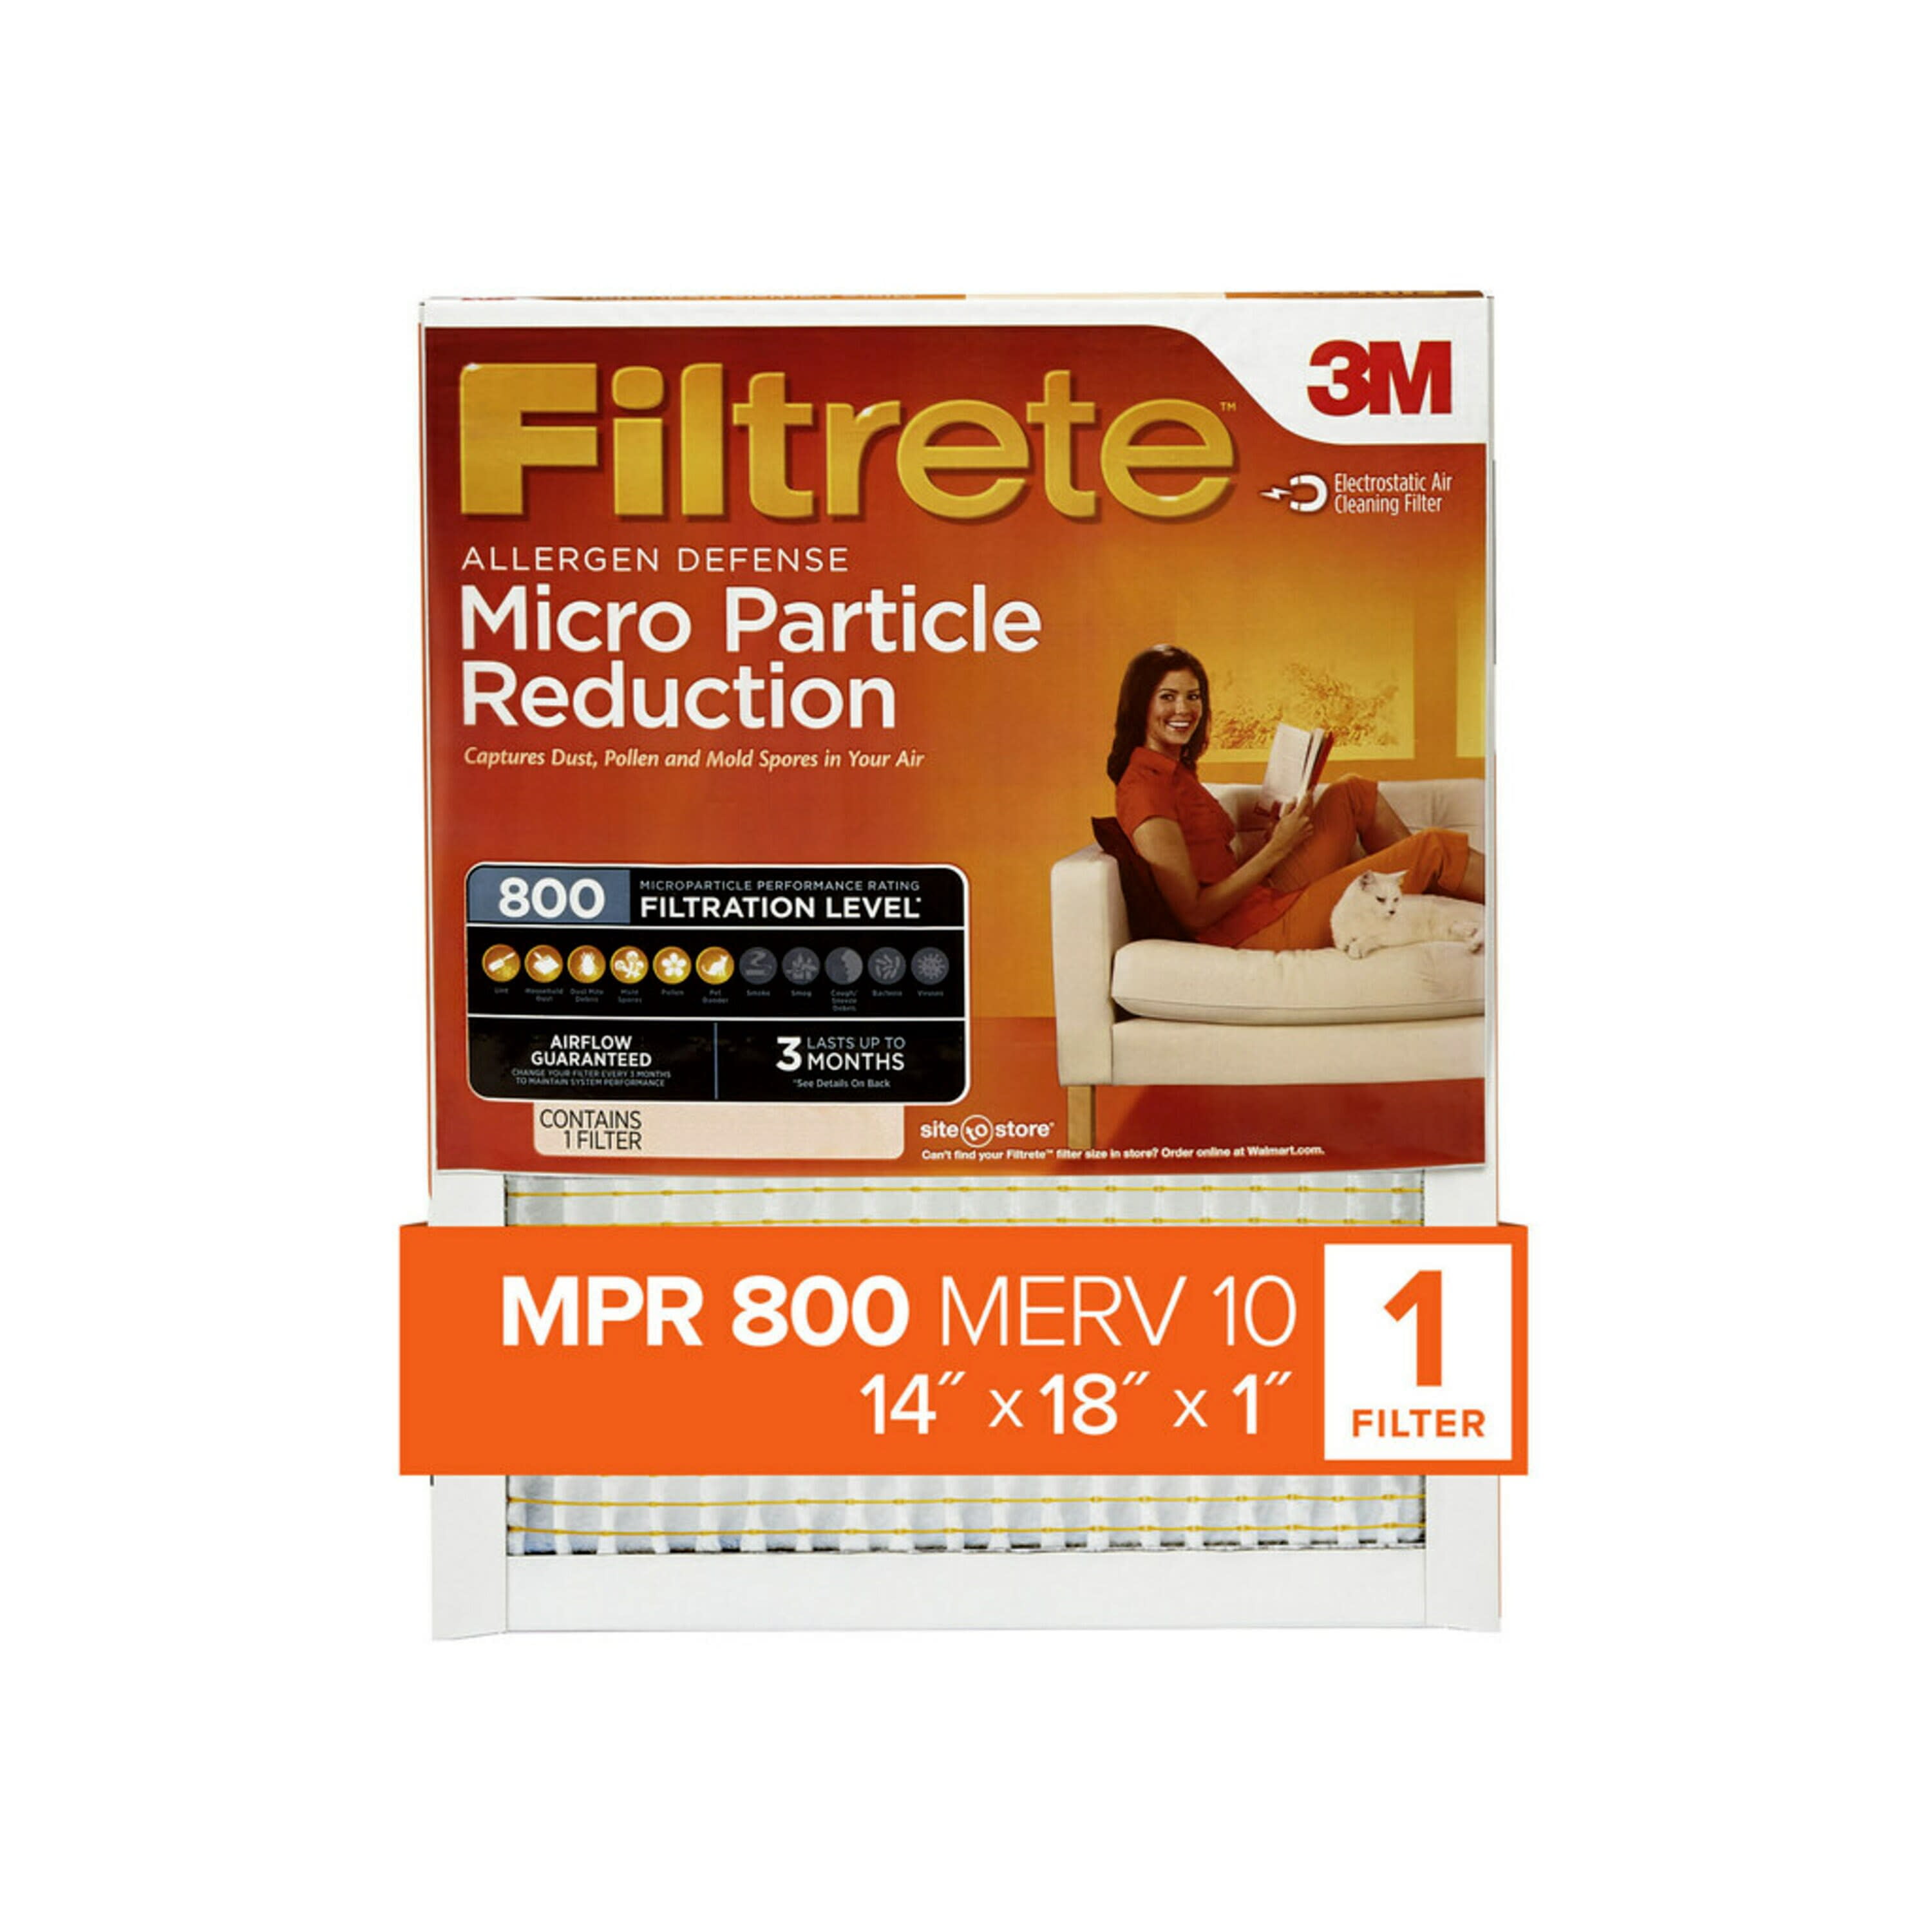 Filtrete™ Micro Particle Reduction Filter, 14 in. x 18 in. x 1 in. , 1 Pack